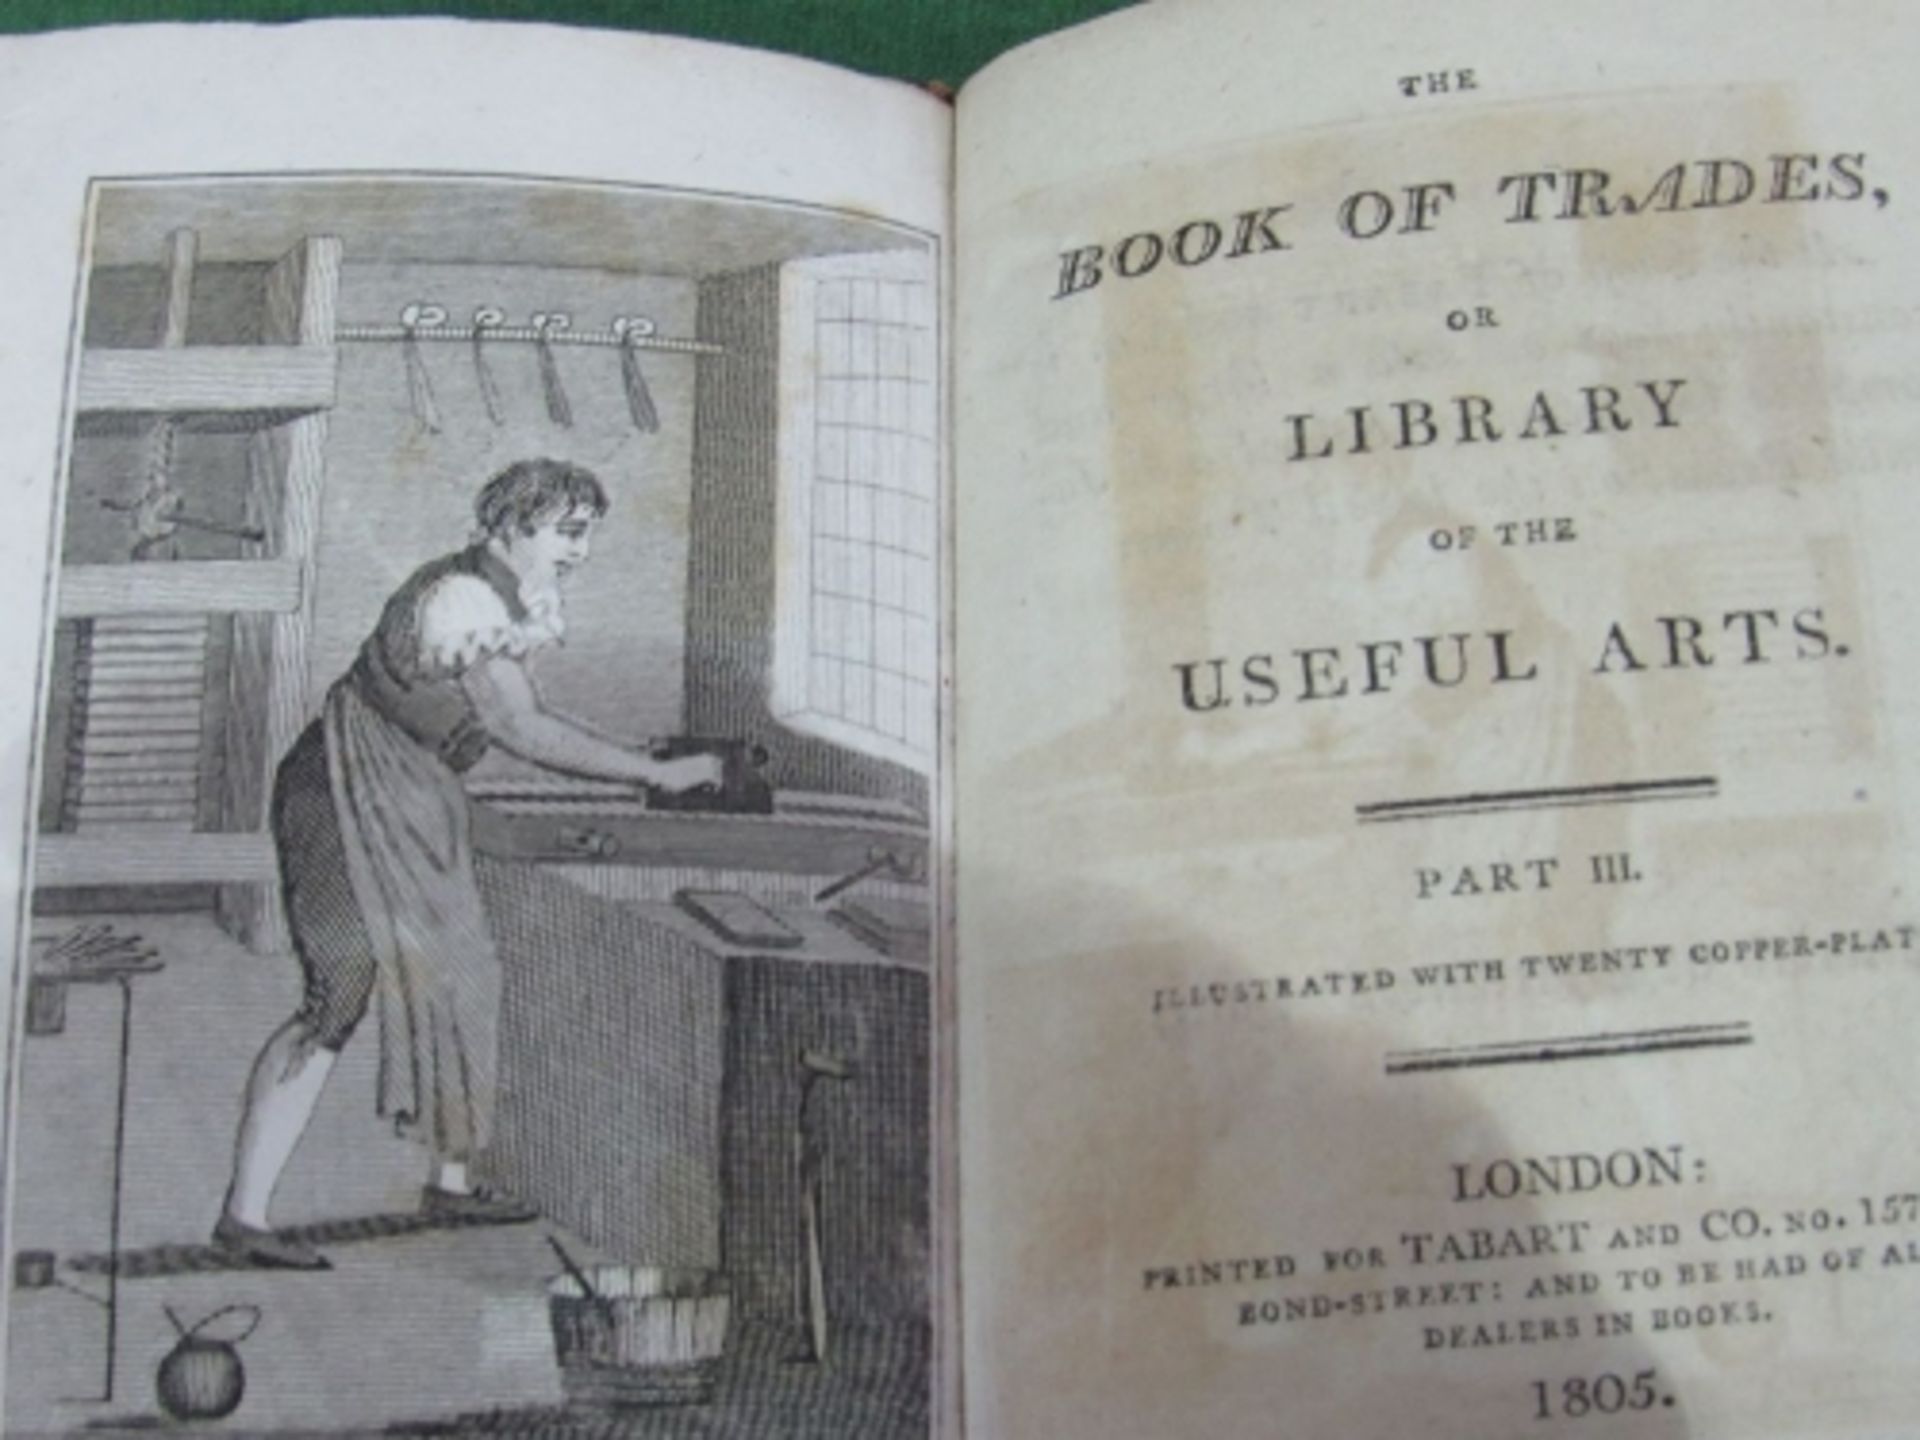 Georgian children's book of careers/trade: 'The Book of Trades' or 'Library of the Useful Arts', - Image 2 of 2